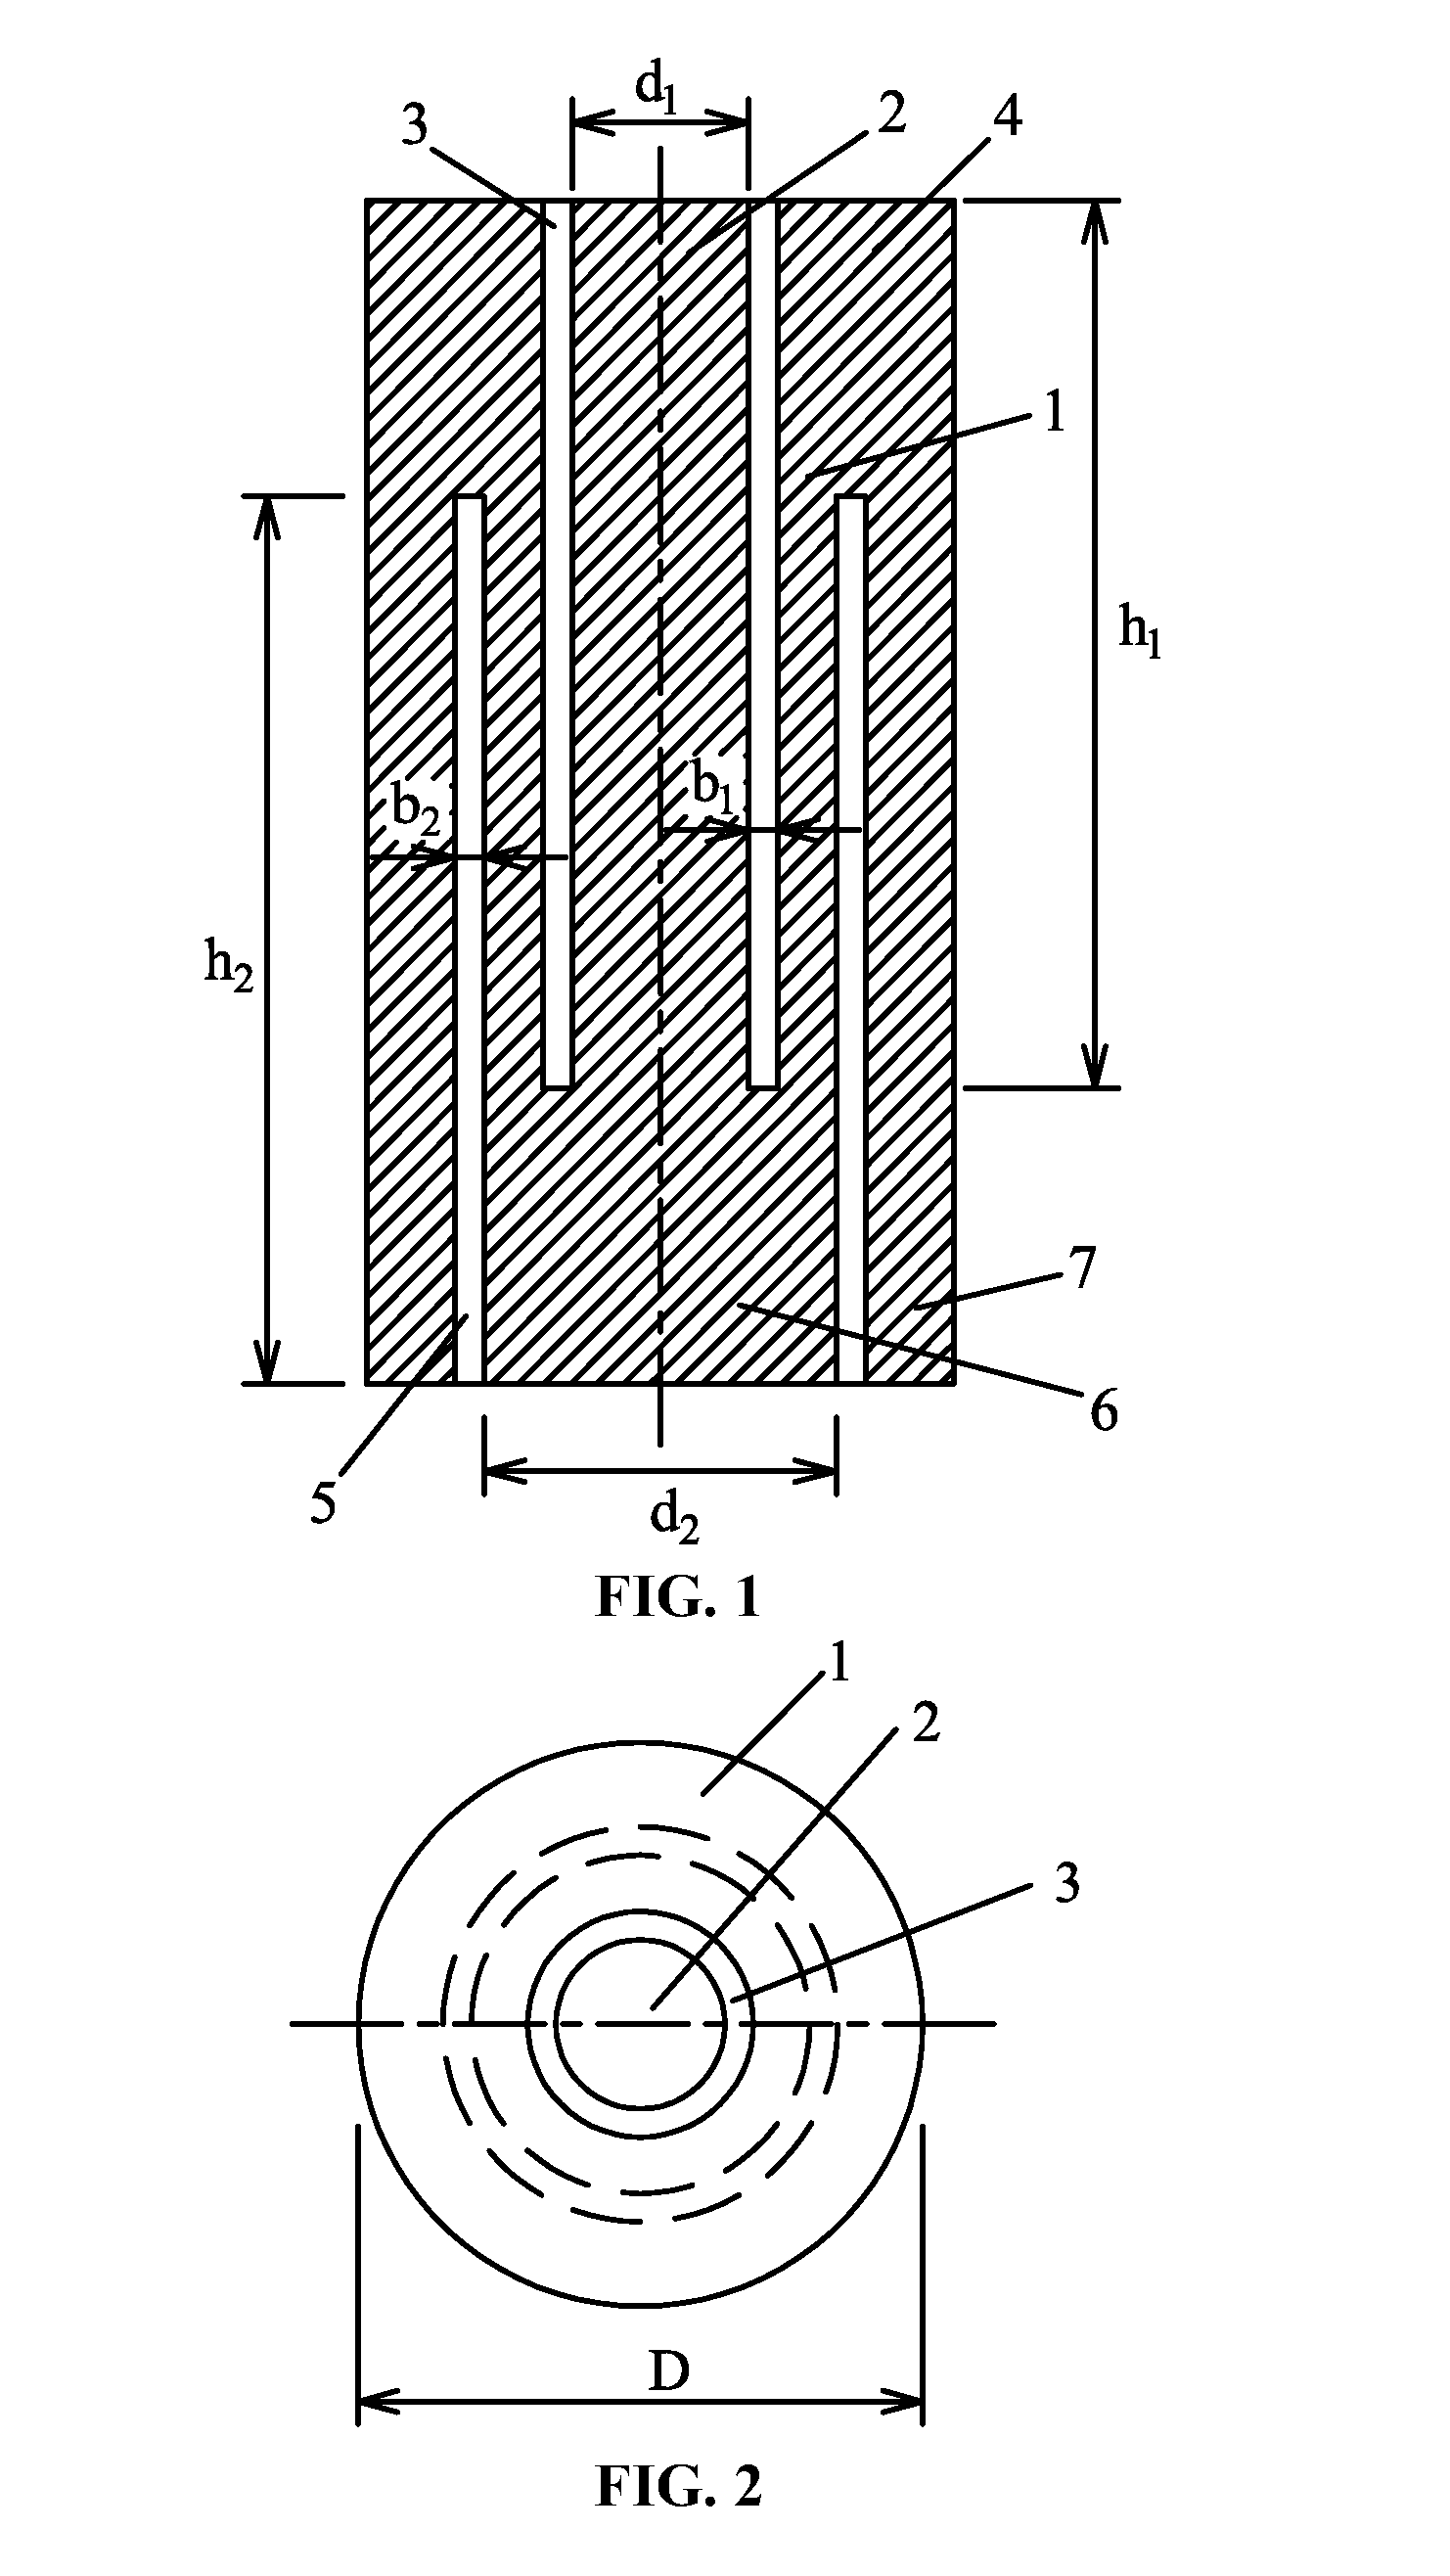 Rock specimen and method for testing direct tensile strength of the same